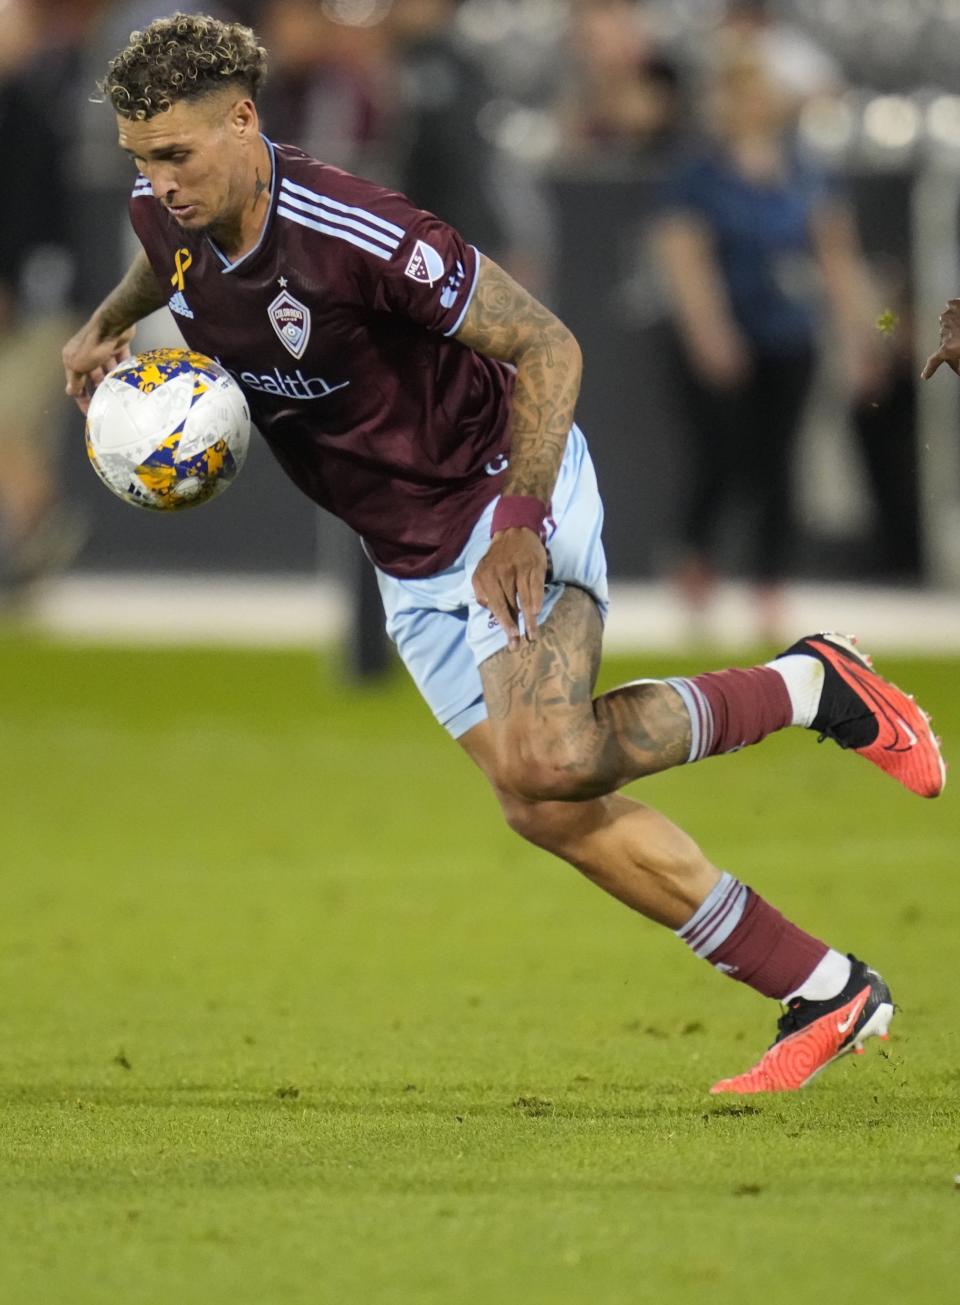 Colorado Rapids forward Rafael Navarro controls the ball against the Vancouver Whitecaps during the first half of an MLS soccer match Wednesday, Sept. 27, 2023, in Commerce City, Colo. (AP Photo/Jack Dempsey)